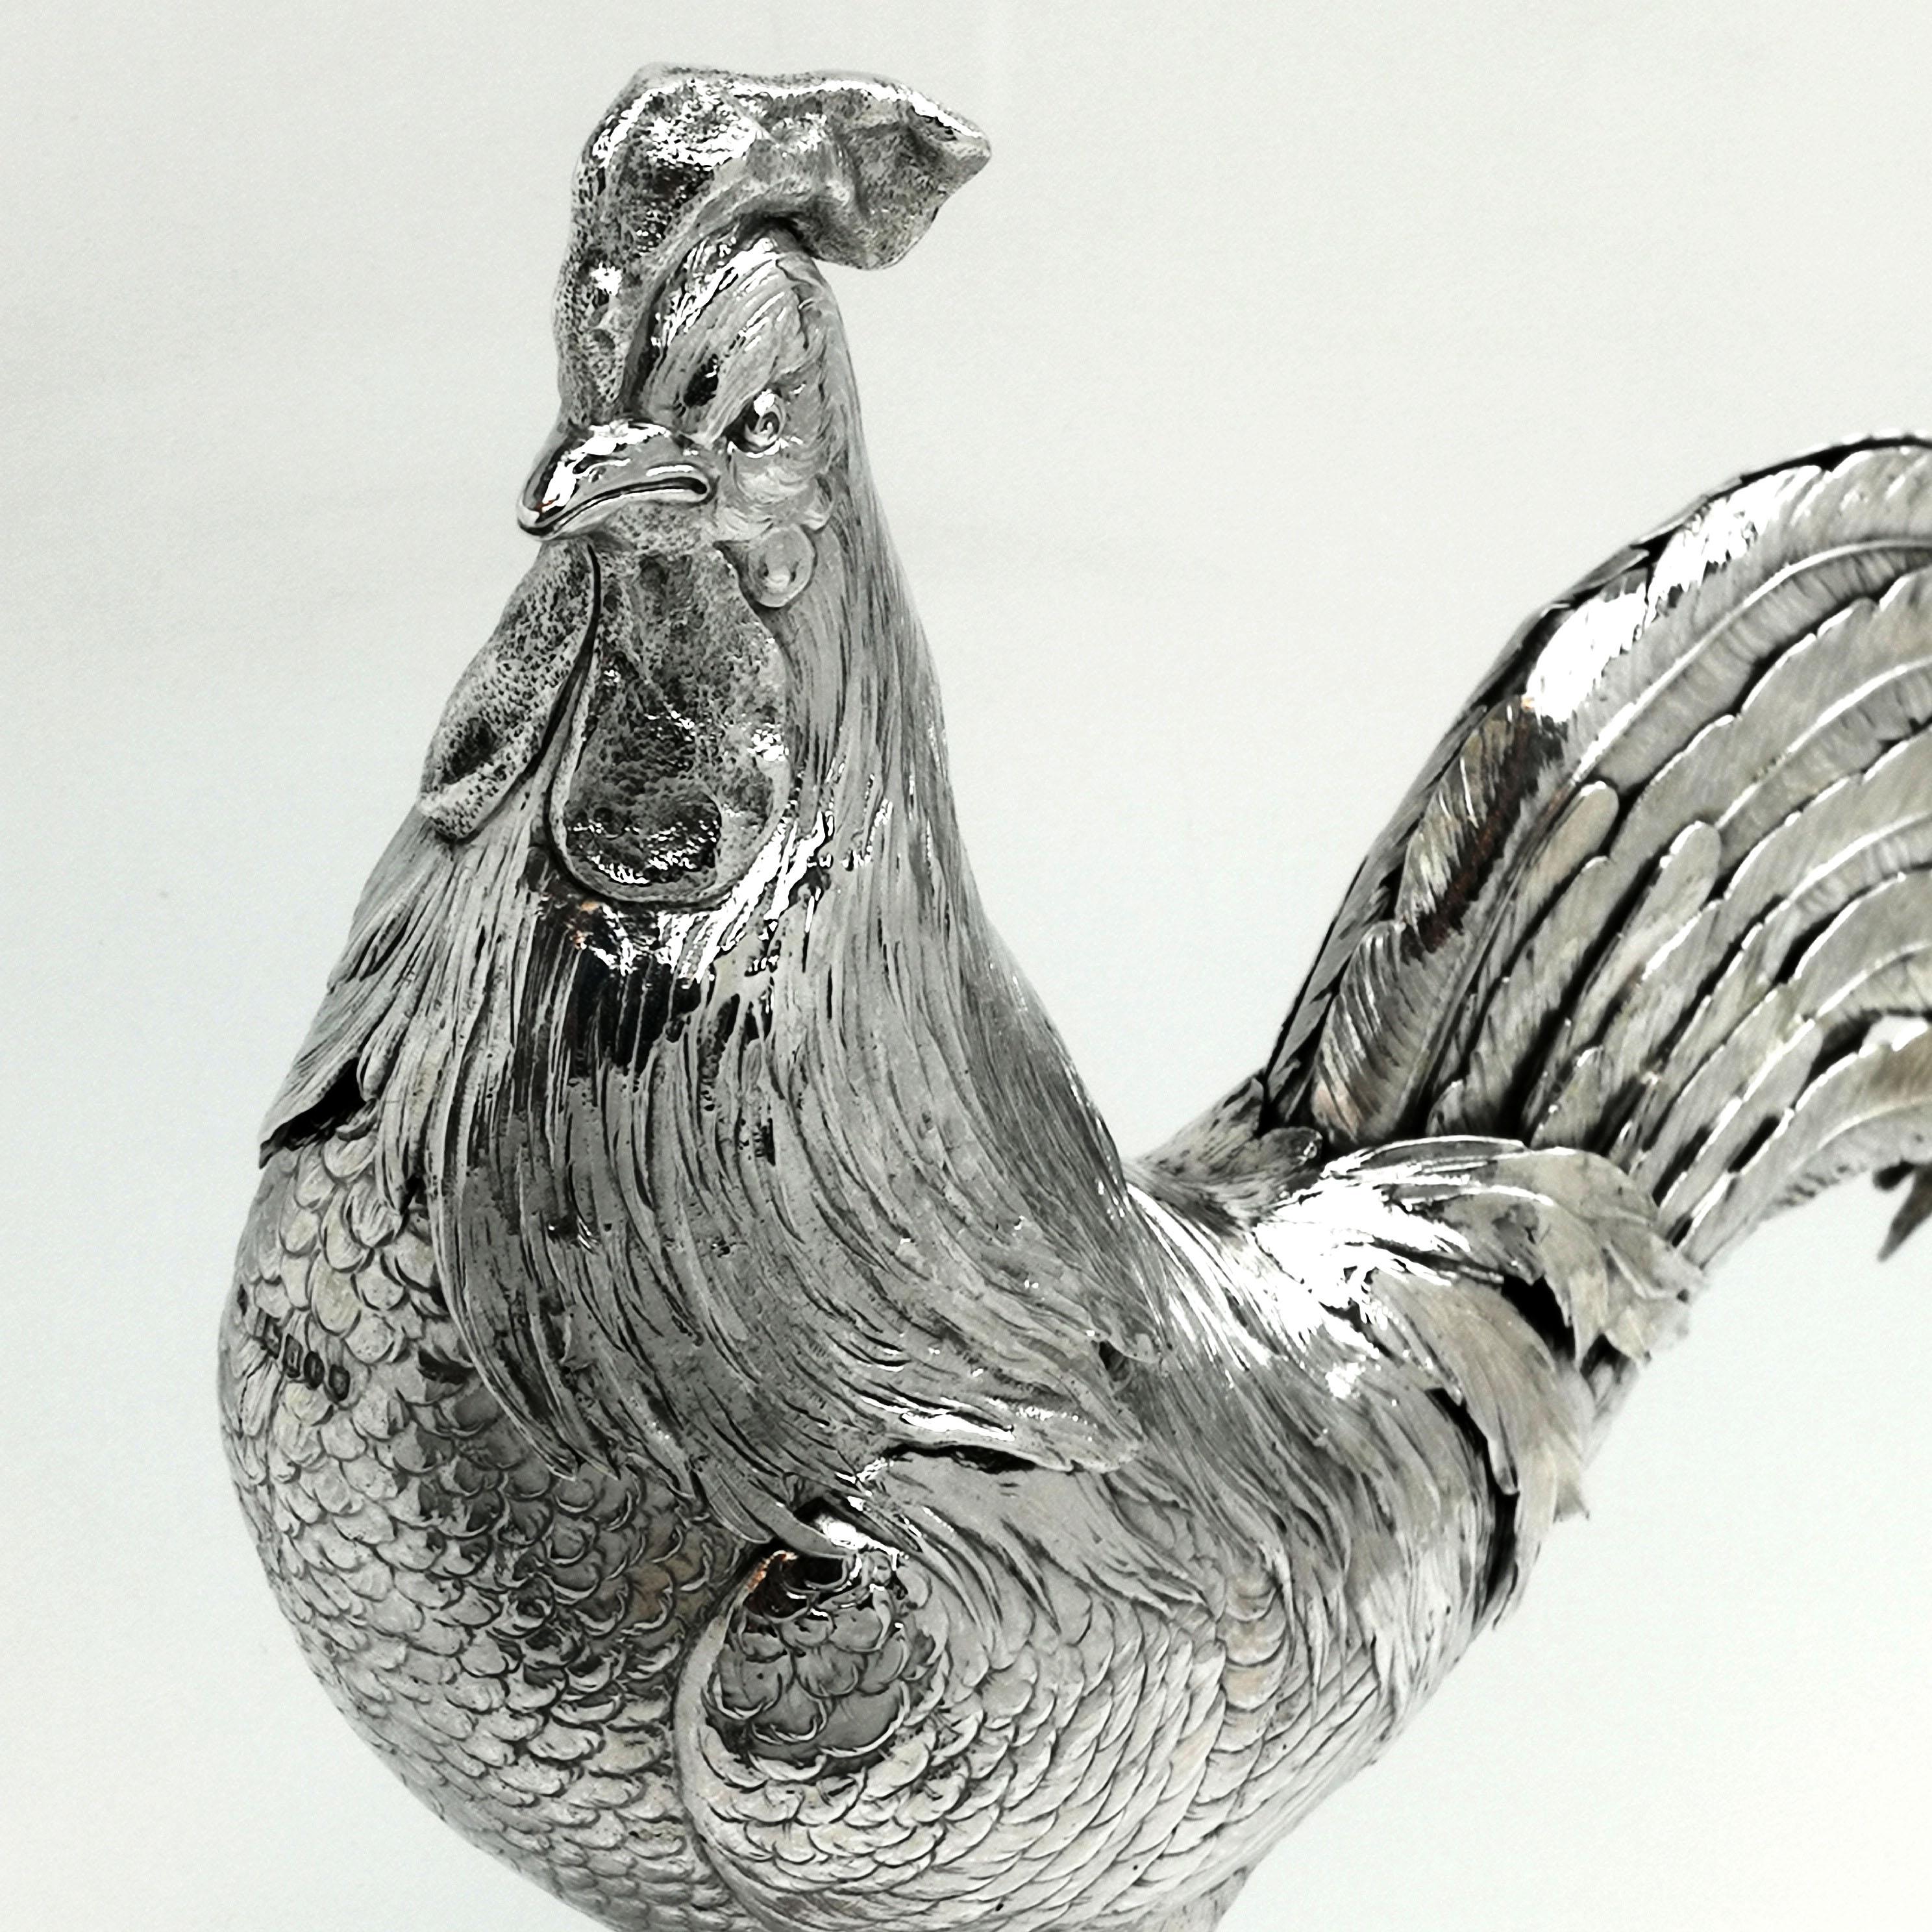 19th Century Antique German Silver Cockerel / Rooster Model Figure on Base 1899 ‘Import Mark’ For Sale